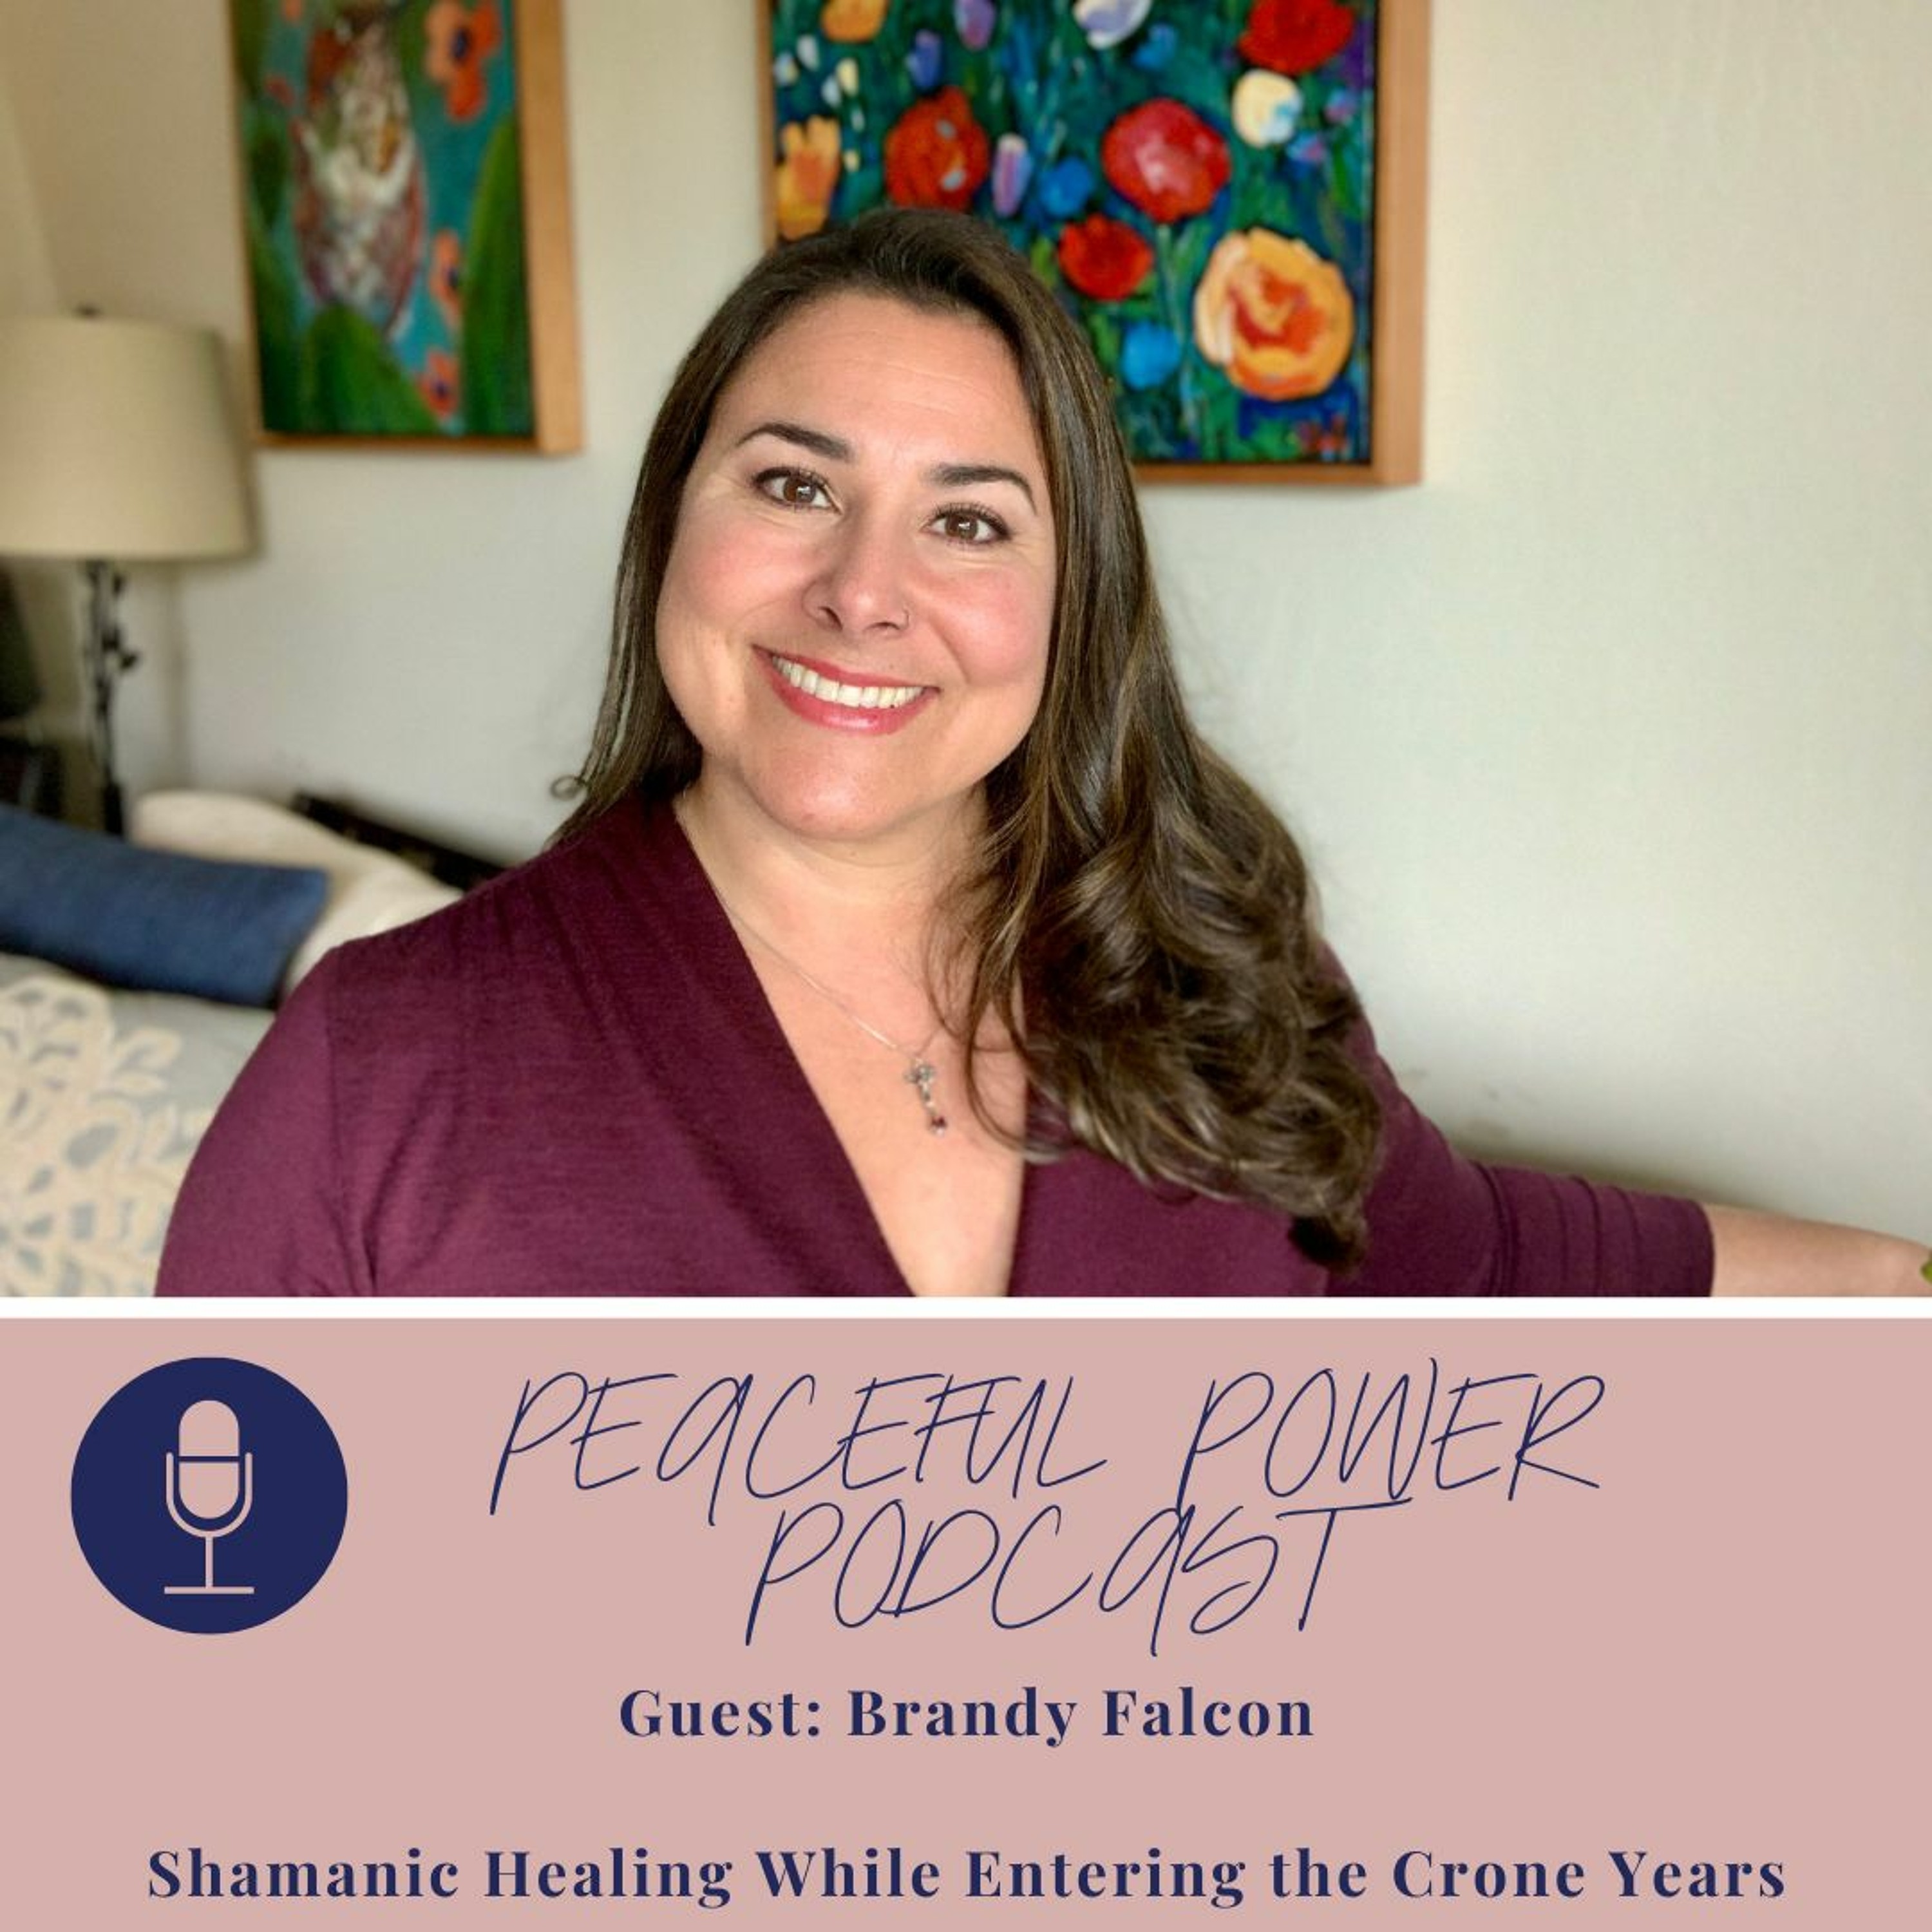 Brandy Falcon on Shamanic Healing While Entering the Crone Years